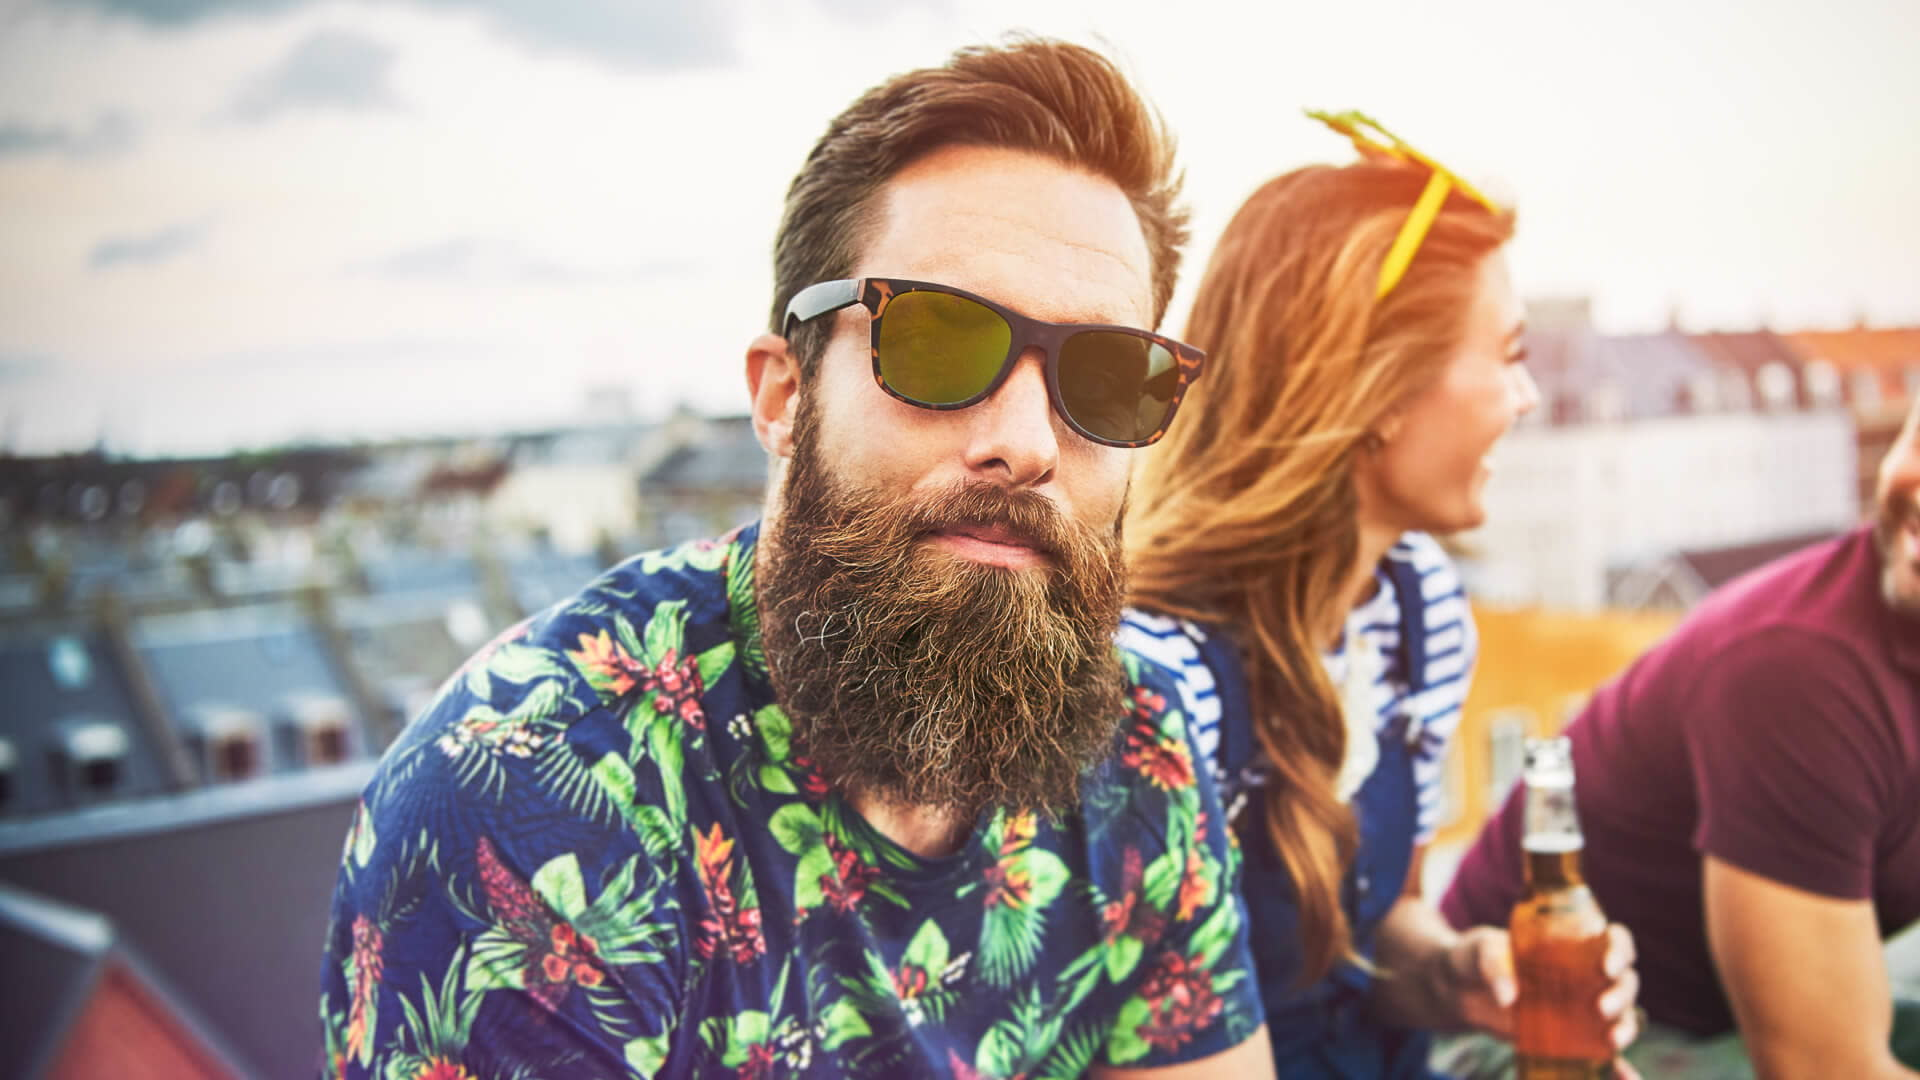 Men with beards are more attractive, says science